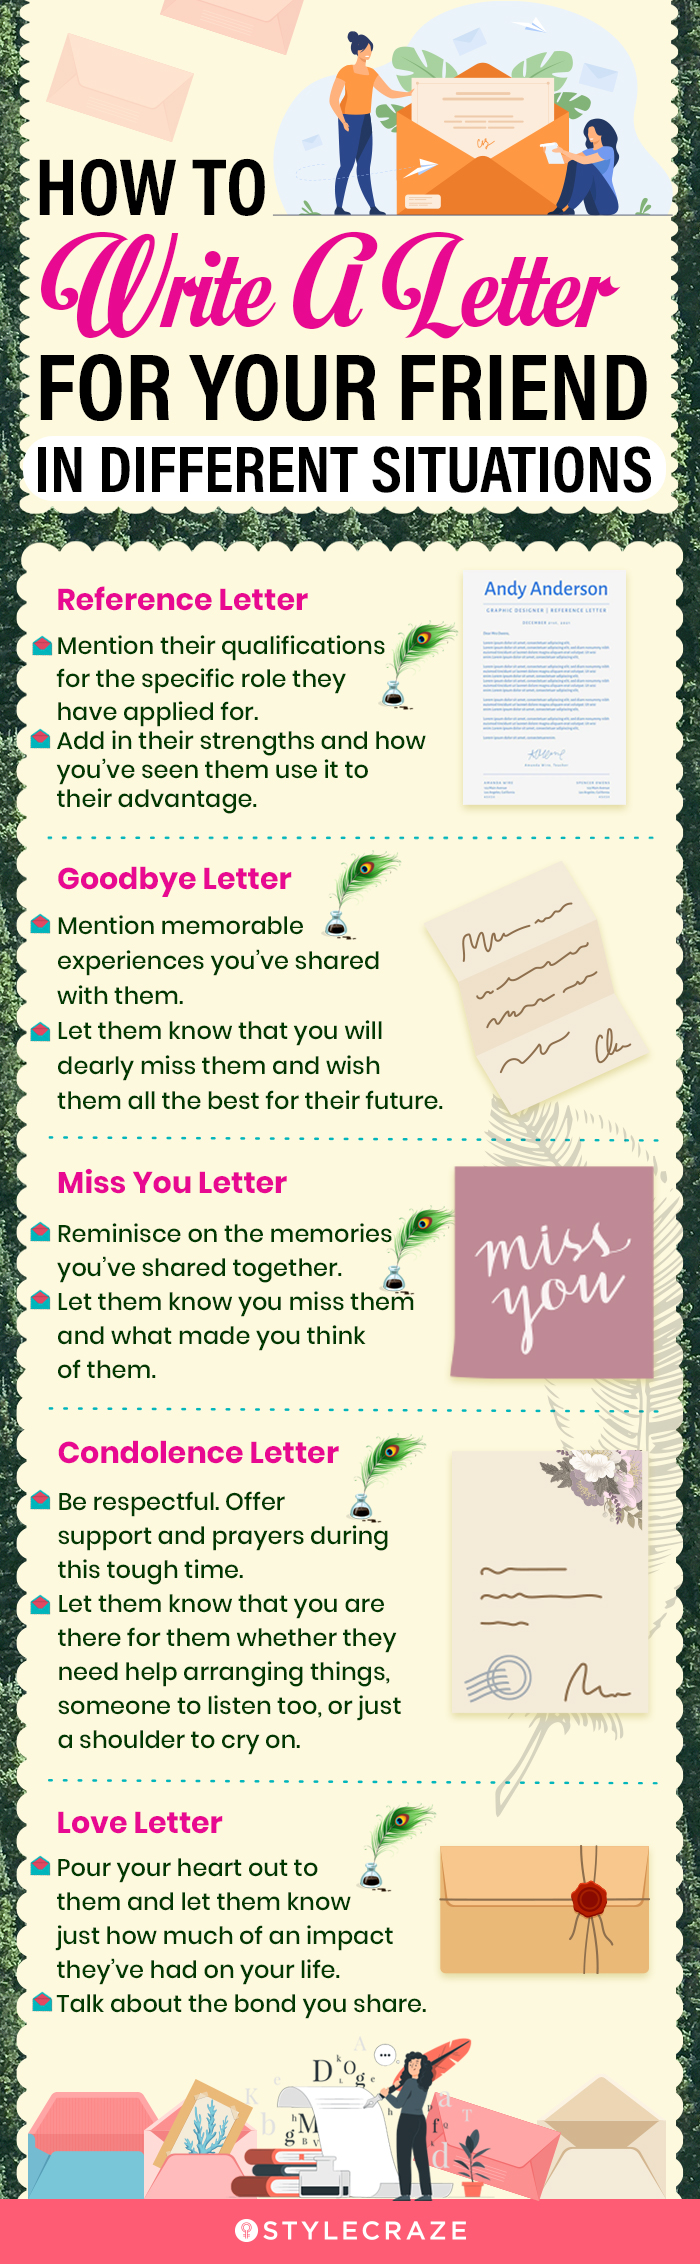 how to write a letter for your friend in different situations (infographic)